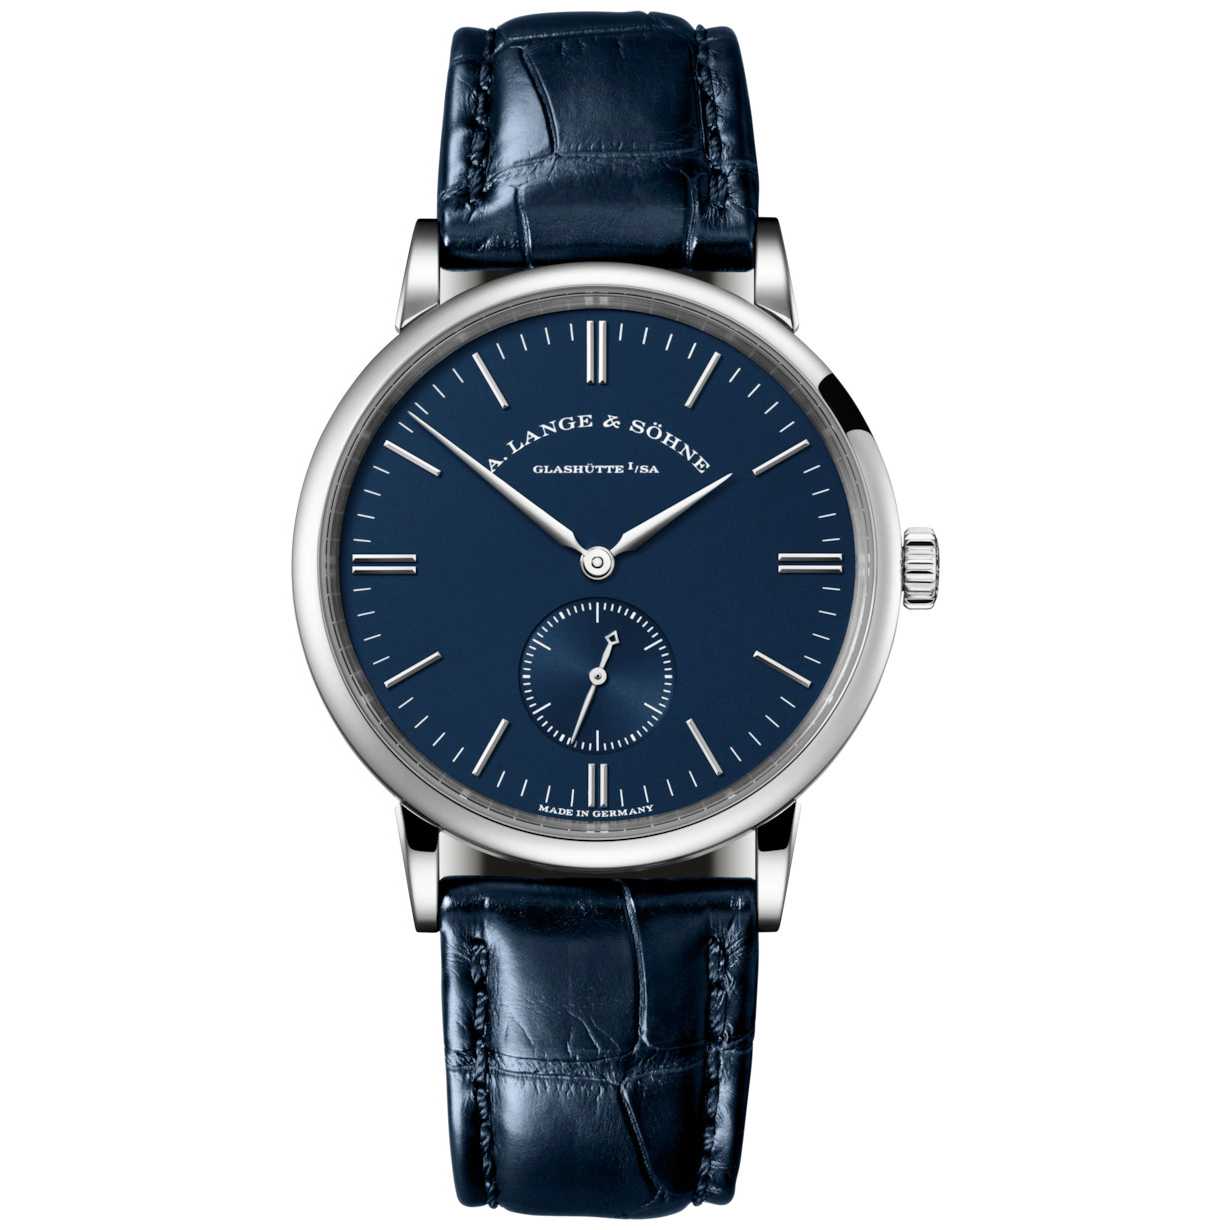 A. Lange & Söhne Saxonia Blue Dial White Gold 219.028 for $17,300 ...